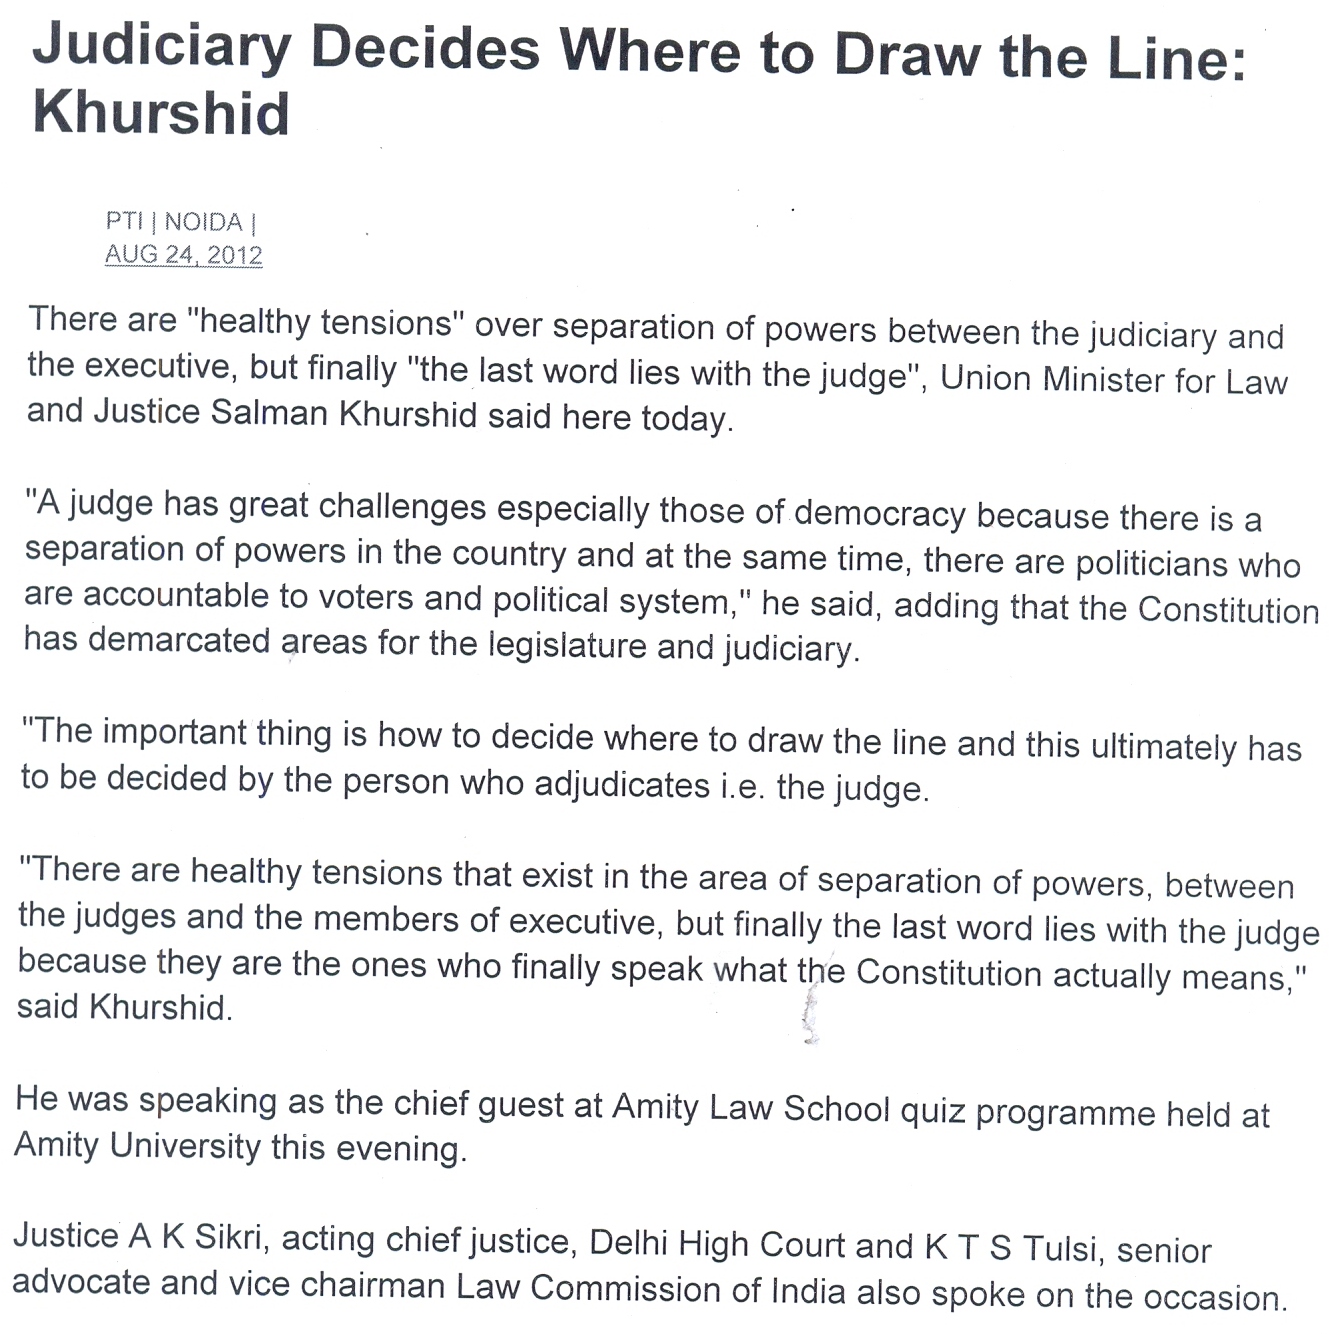 Judiciary decides where to draw the line, says Minister for Law & Justice Salman Khurshid at Amity